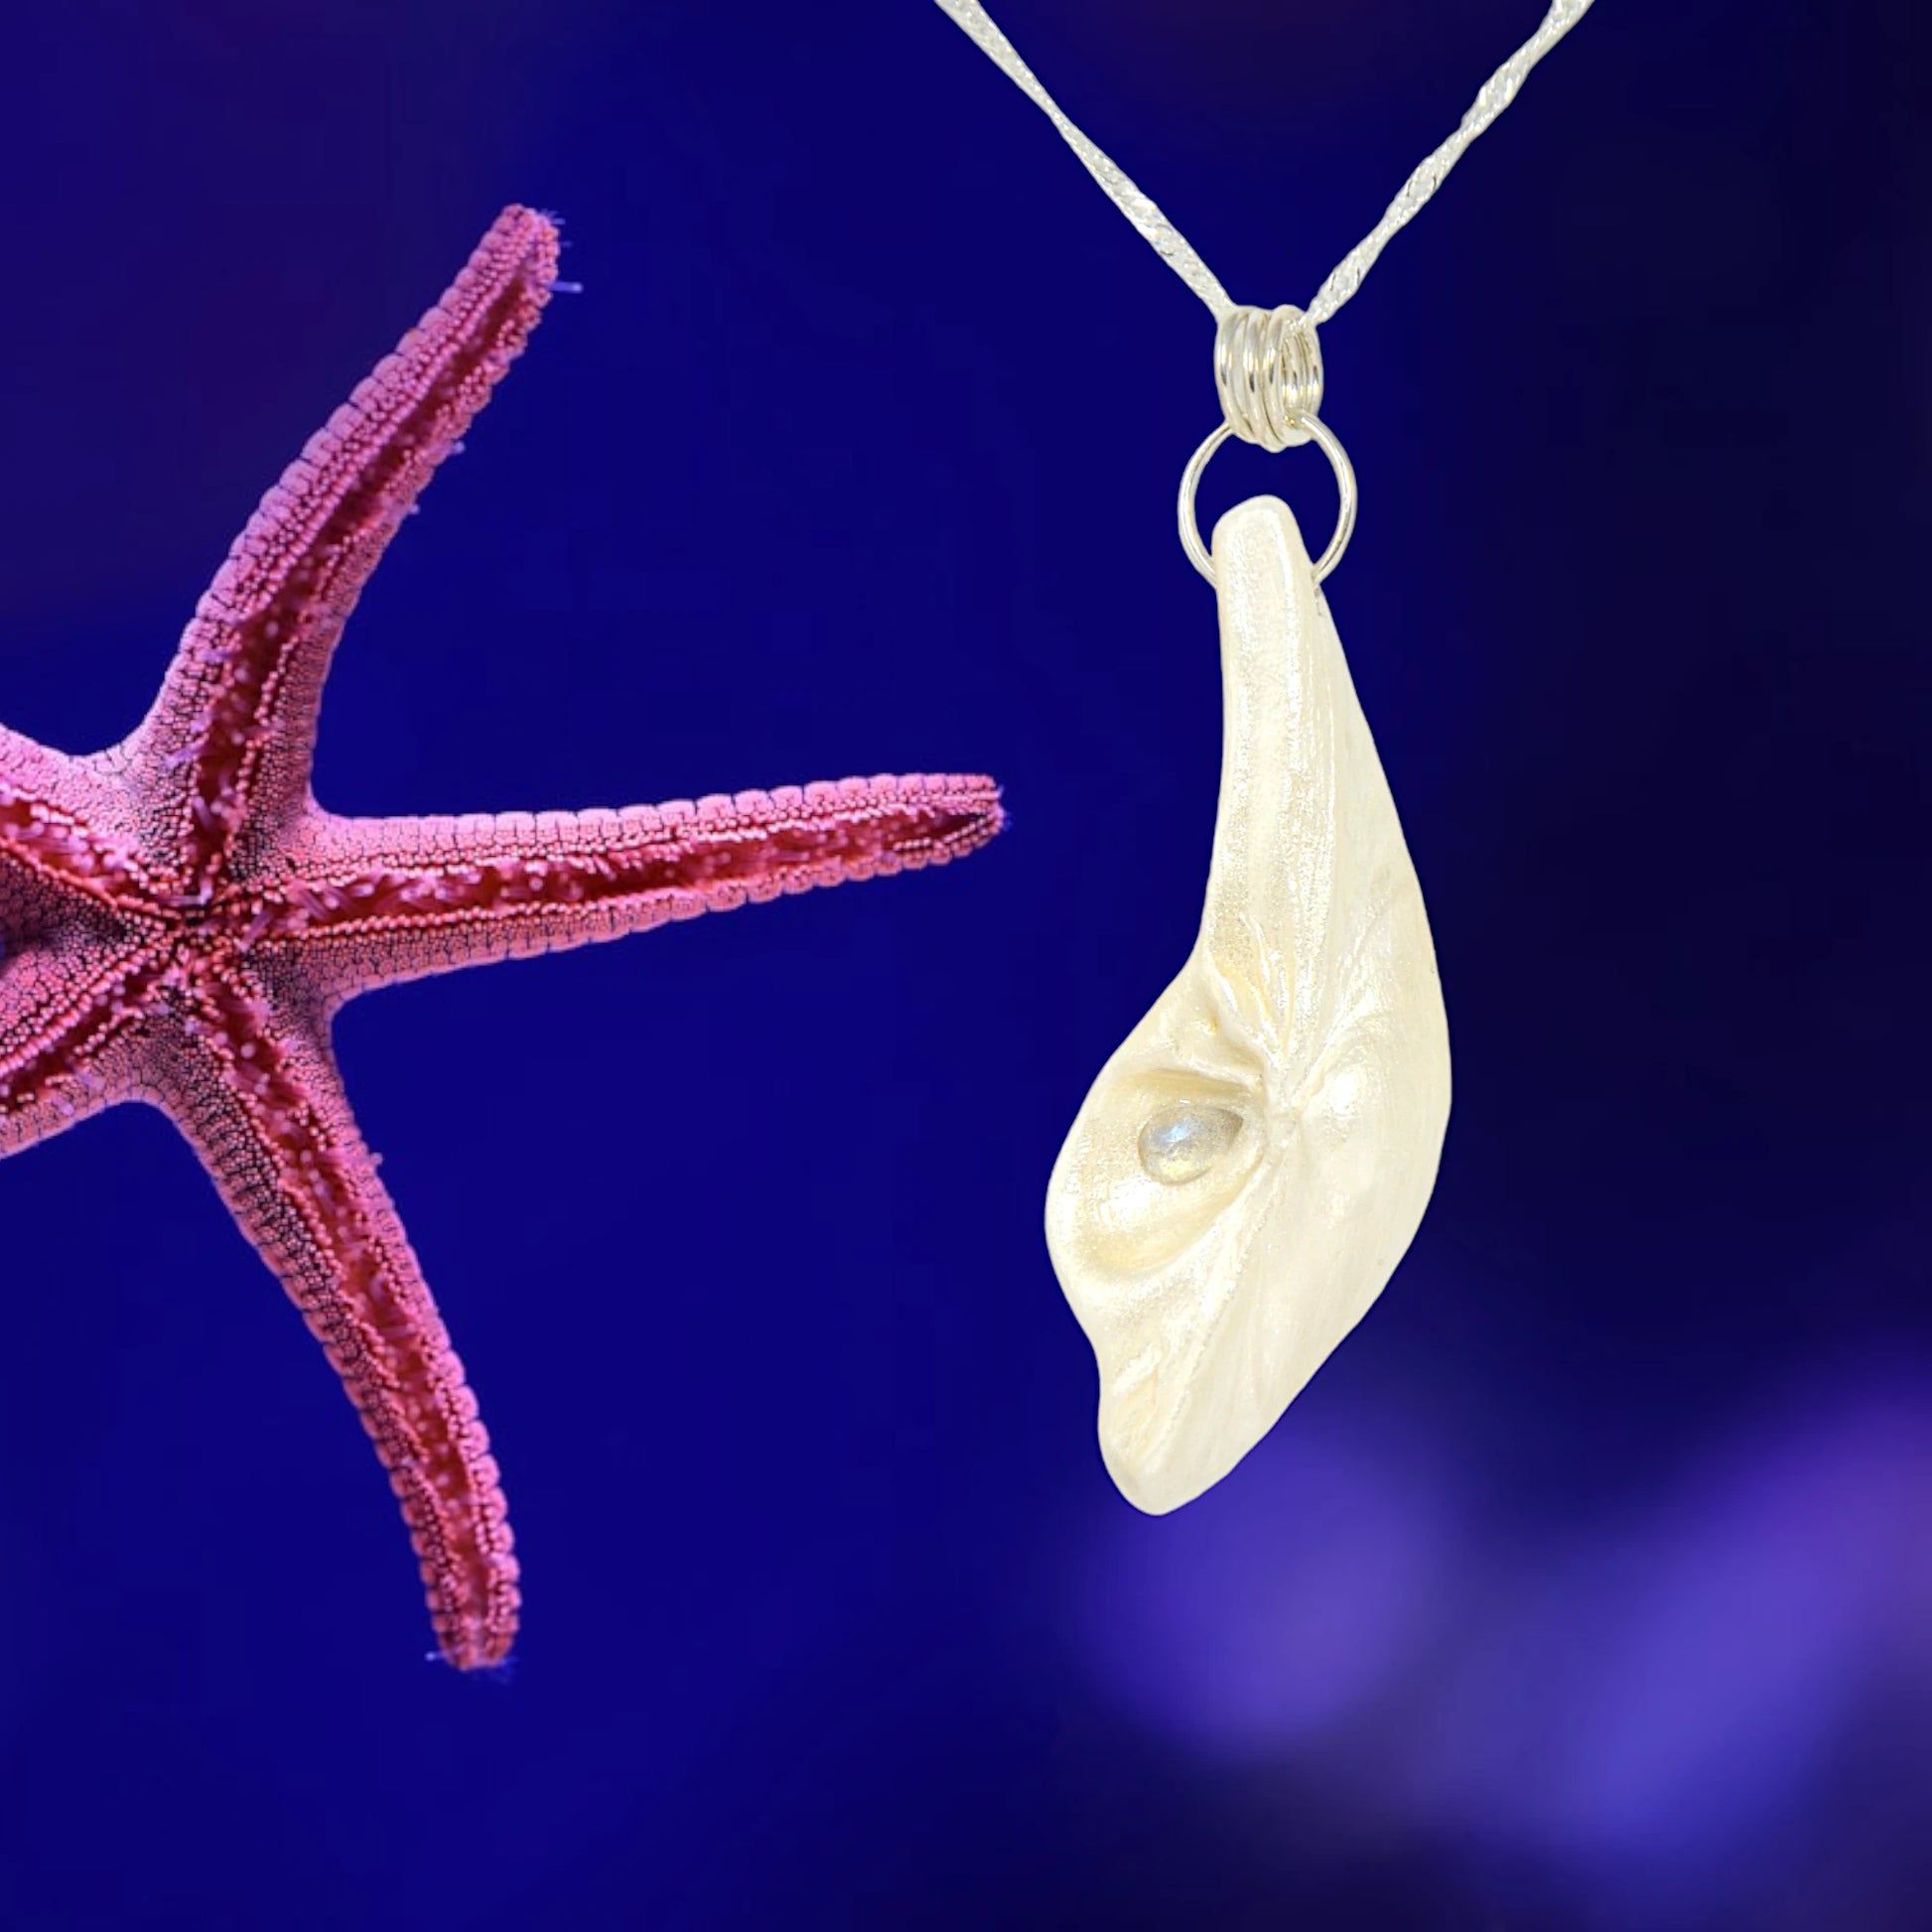 Cool Summer pendant made of natural seashell with a tear drop shape rose cut labradorite gemstone.  The pendant is shown on a blue background with a pink starfish.